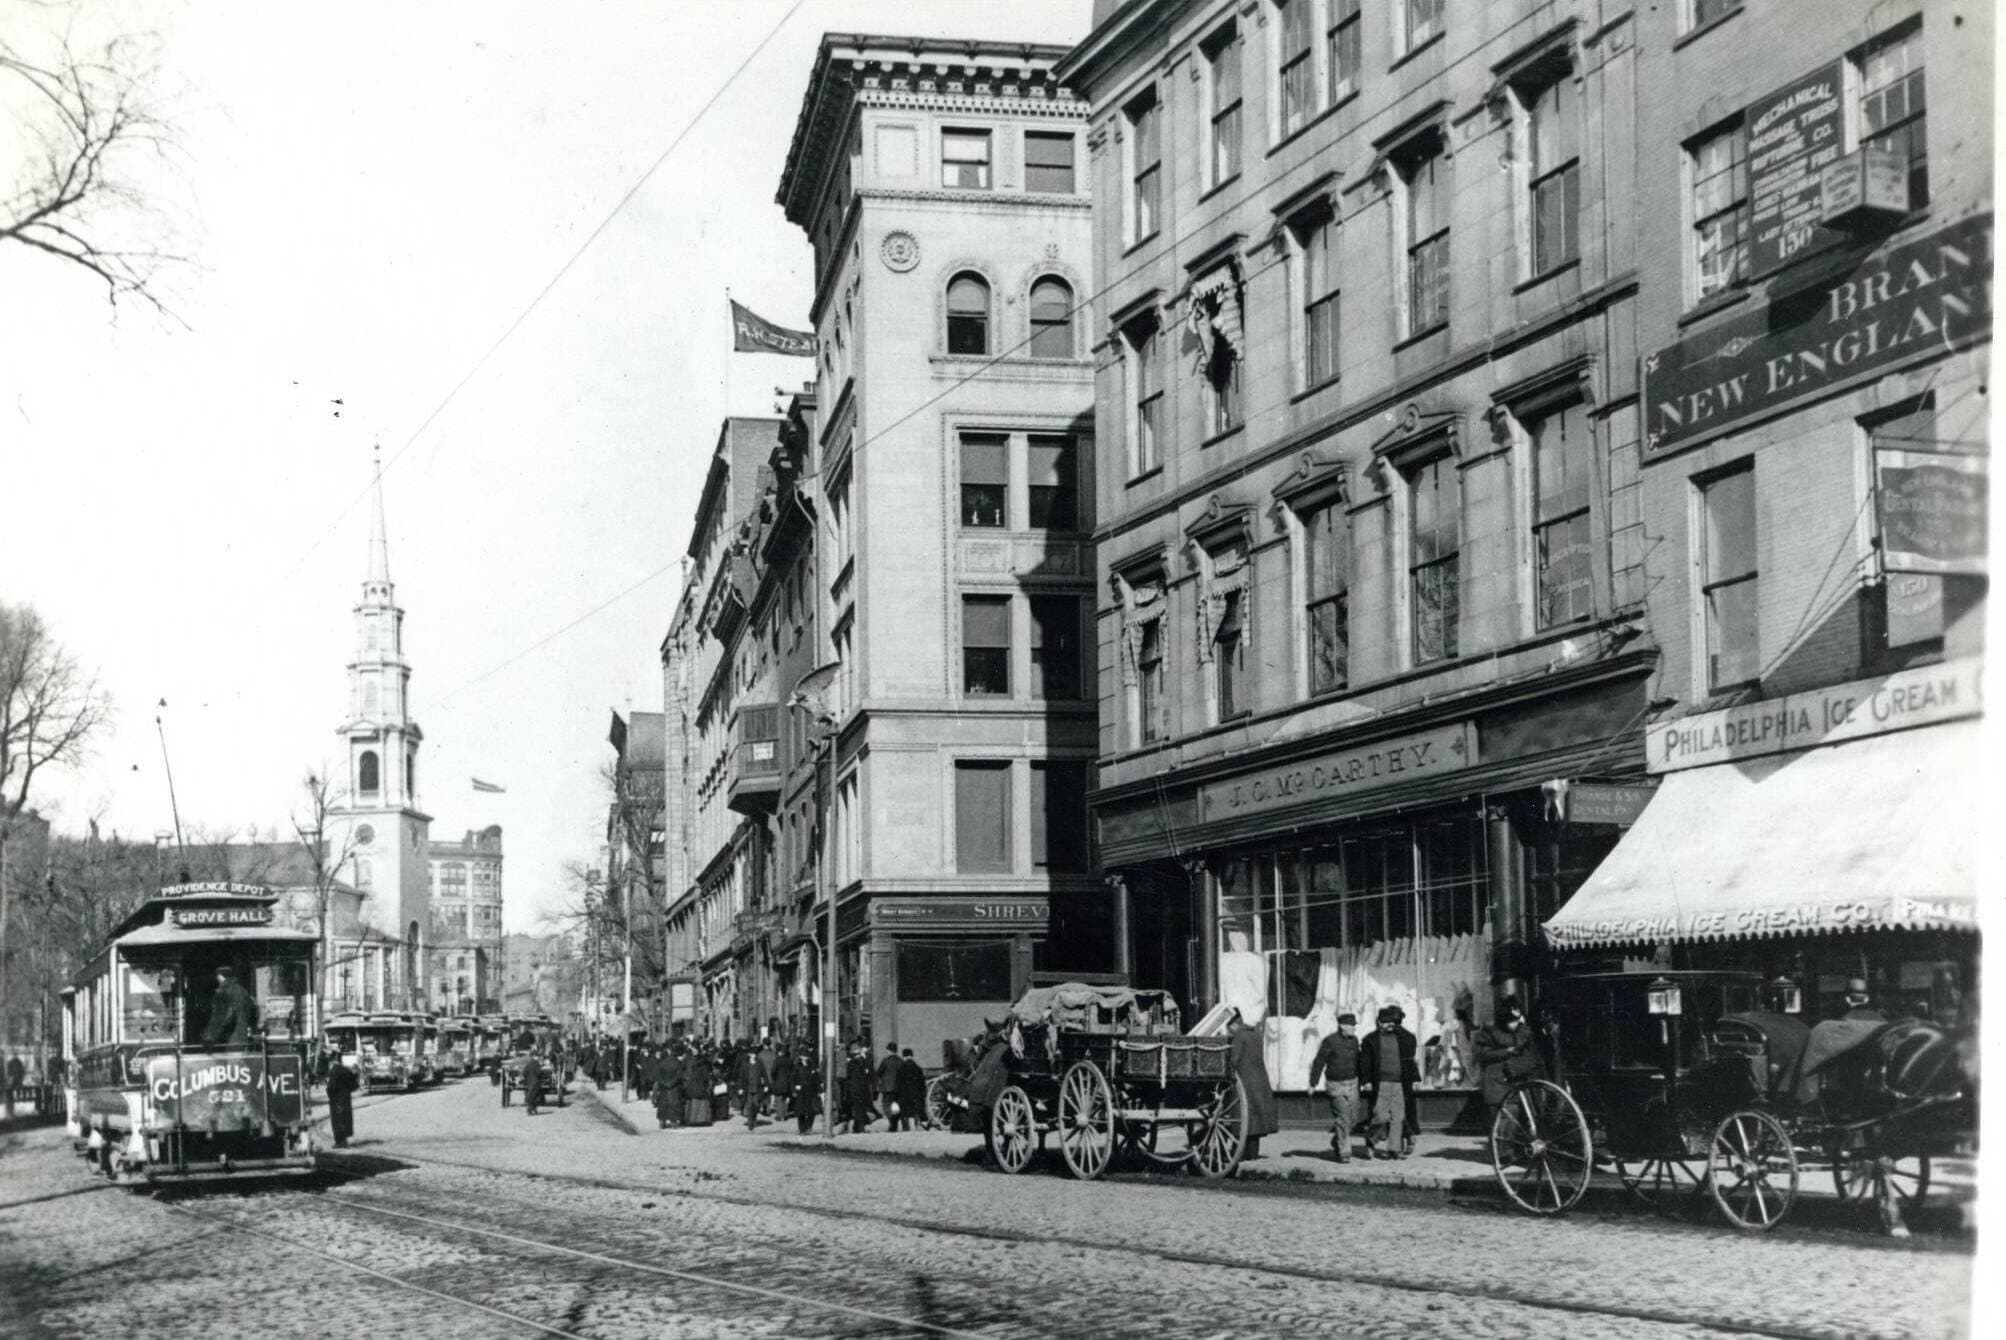 A black and white photograph with a trolley car from the late 1800s traveling along a city street.